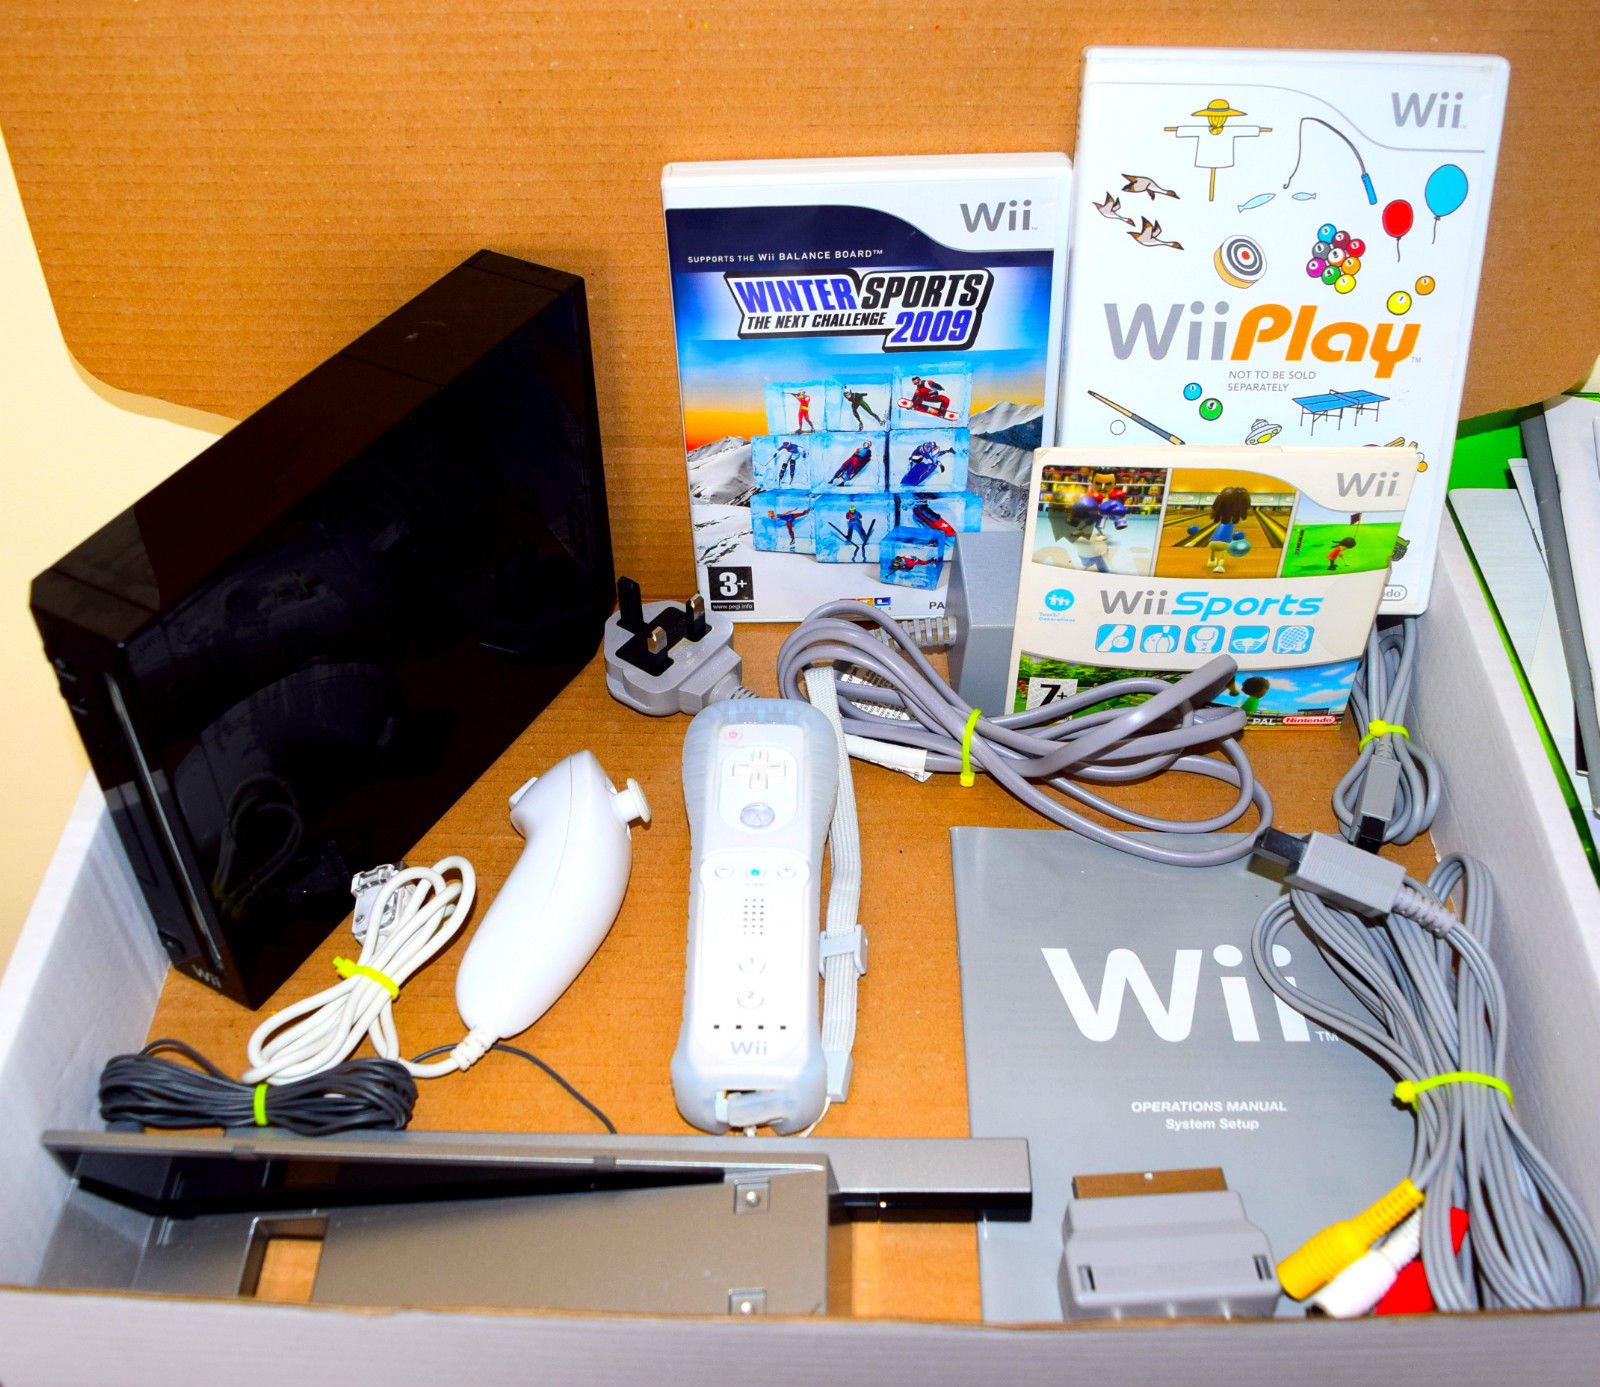 Black Nintendo Wii Console PAL, Remote, Nunchuck, 24 Games (Wii Sports & Play)